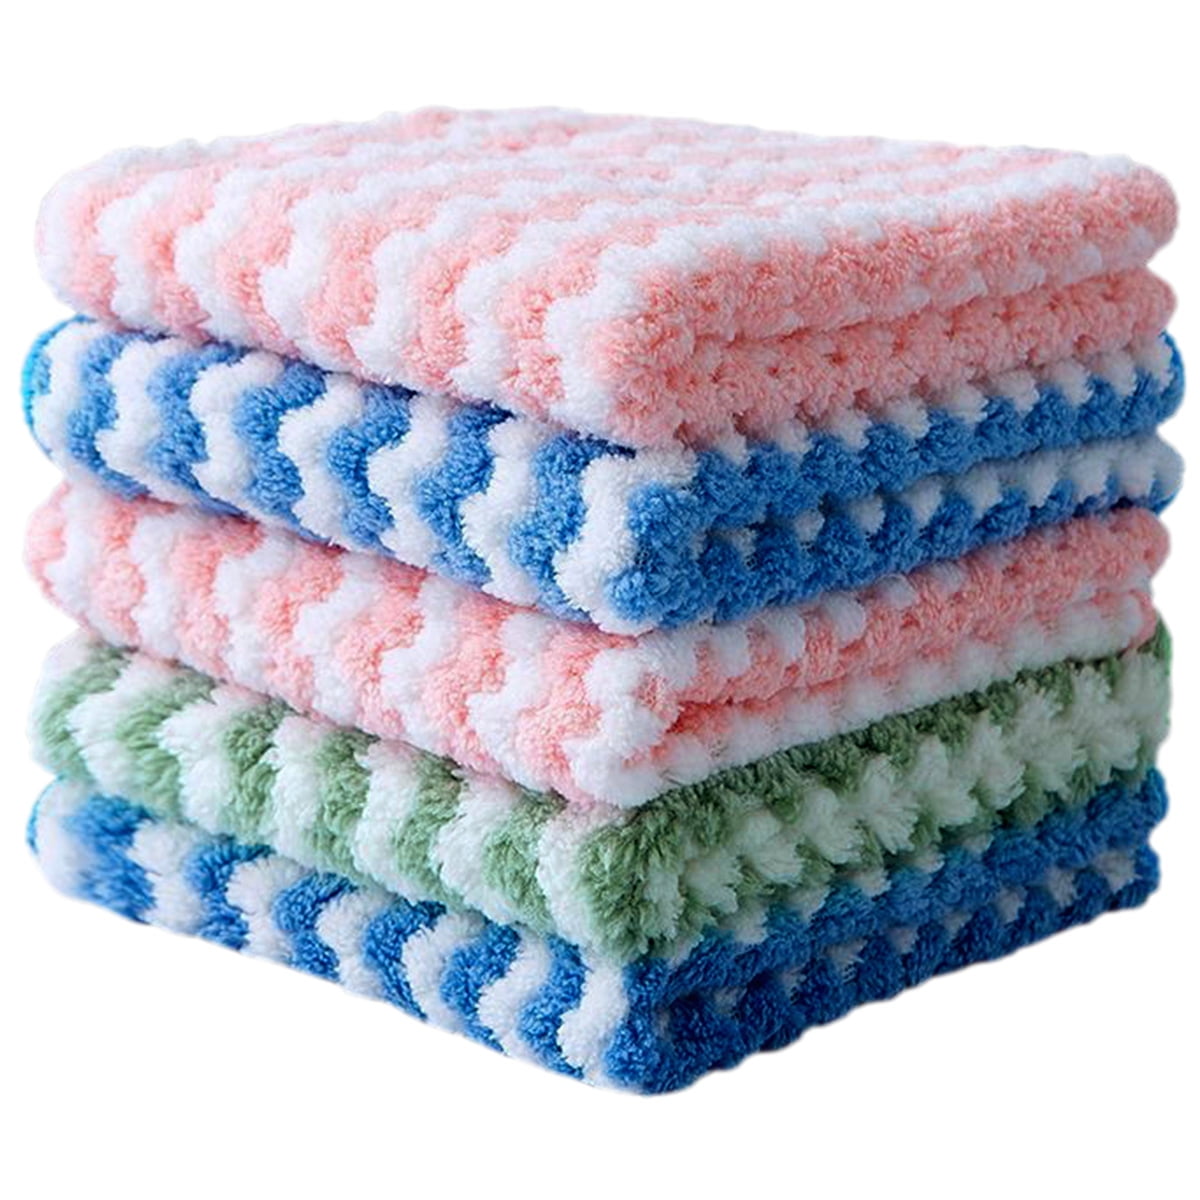  Niaini 20 Pack Kitchen Cloth Dish Towels, Super Absorbent 100%  Coral Fleece Dish Towel, Quick-Drying Super Soft Household Cleaning Cloth,  Cloth,Dishcloth Towels， Premium Rags，Dish Rags : Health & Household